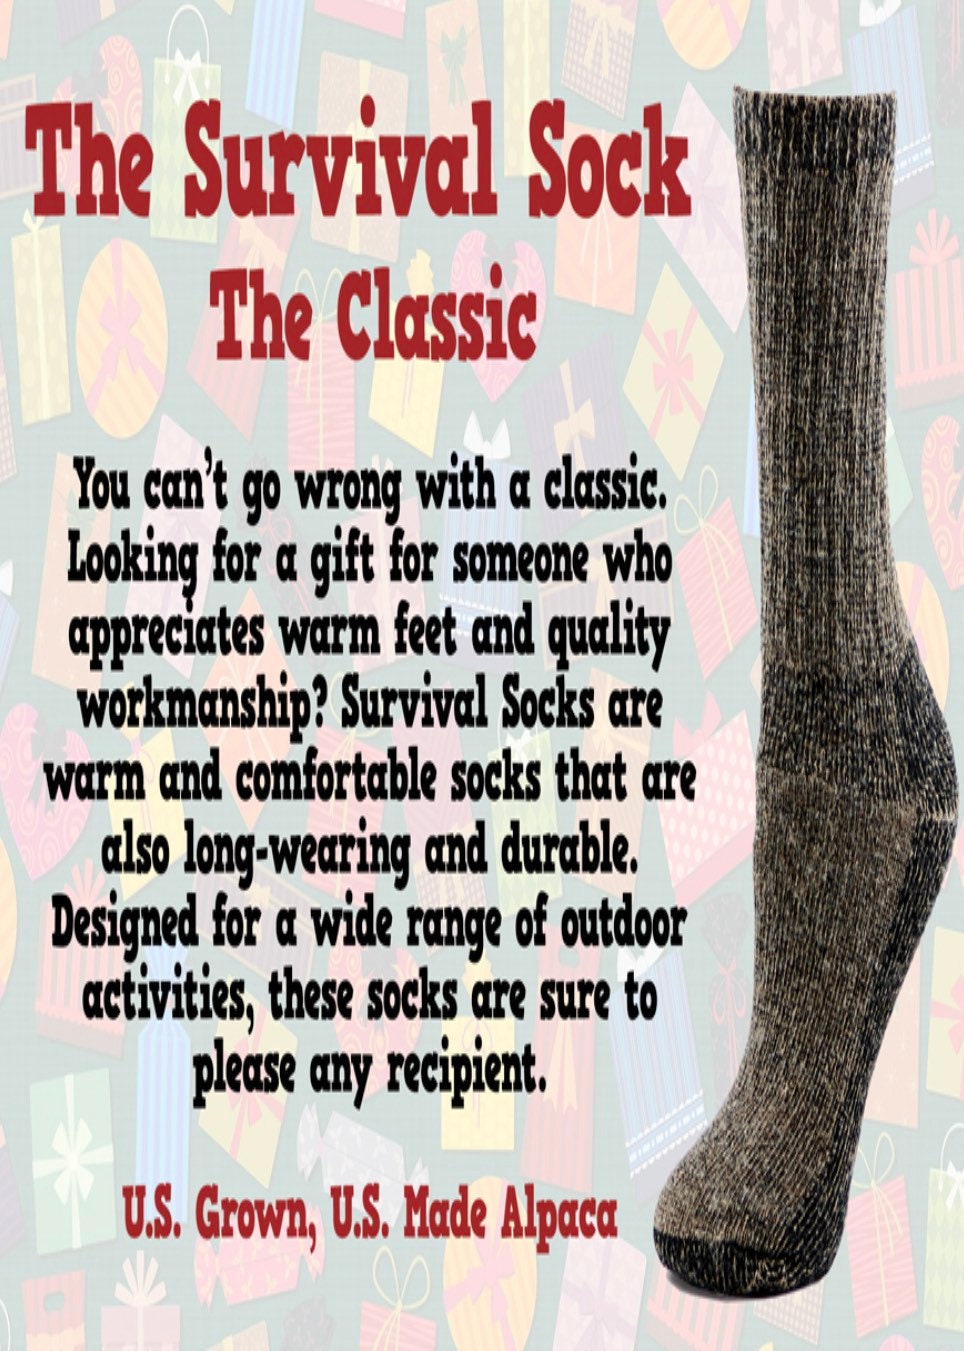 Alpaca Survival Socks, Thick Wool Socks for Men, Boot Socks Women, Hiking Gifts for him, Cozy Gifts for Mom, Outdoor Enthusiast Gift